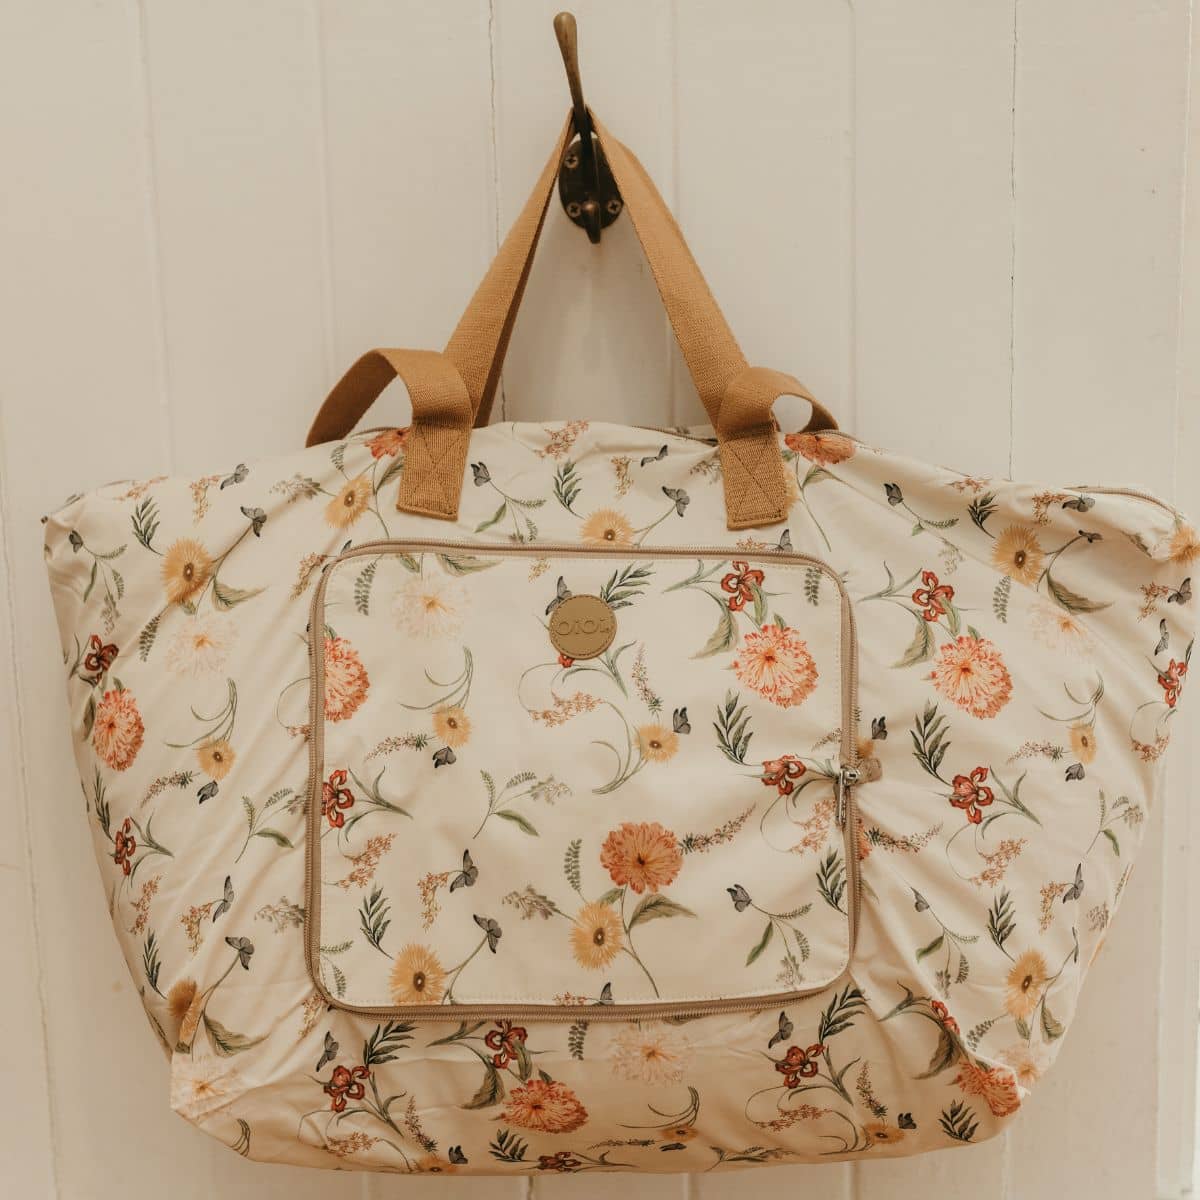 OiOi Fold Up Tote - Wildflower